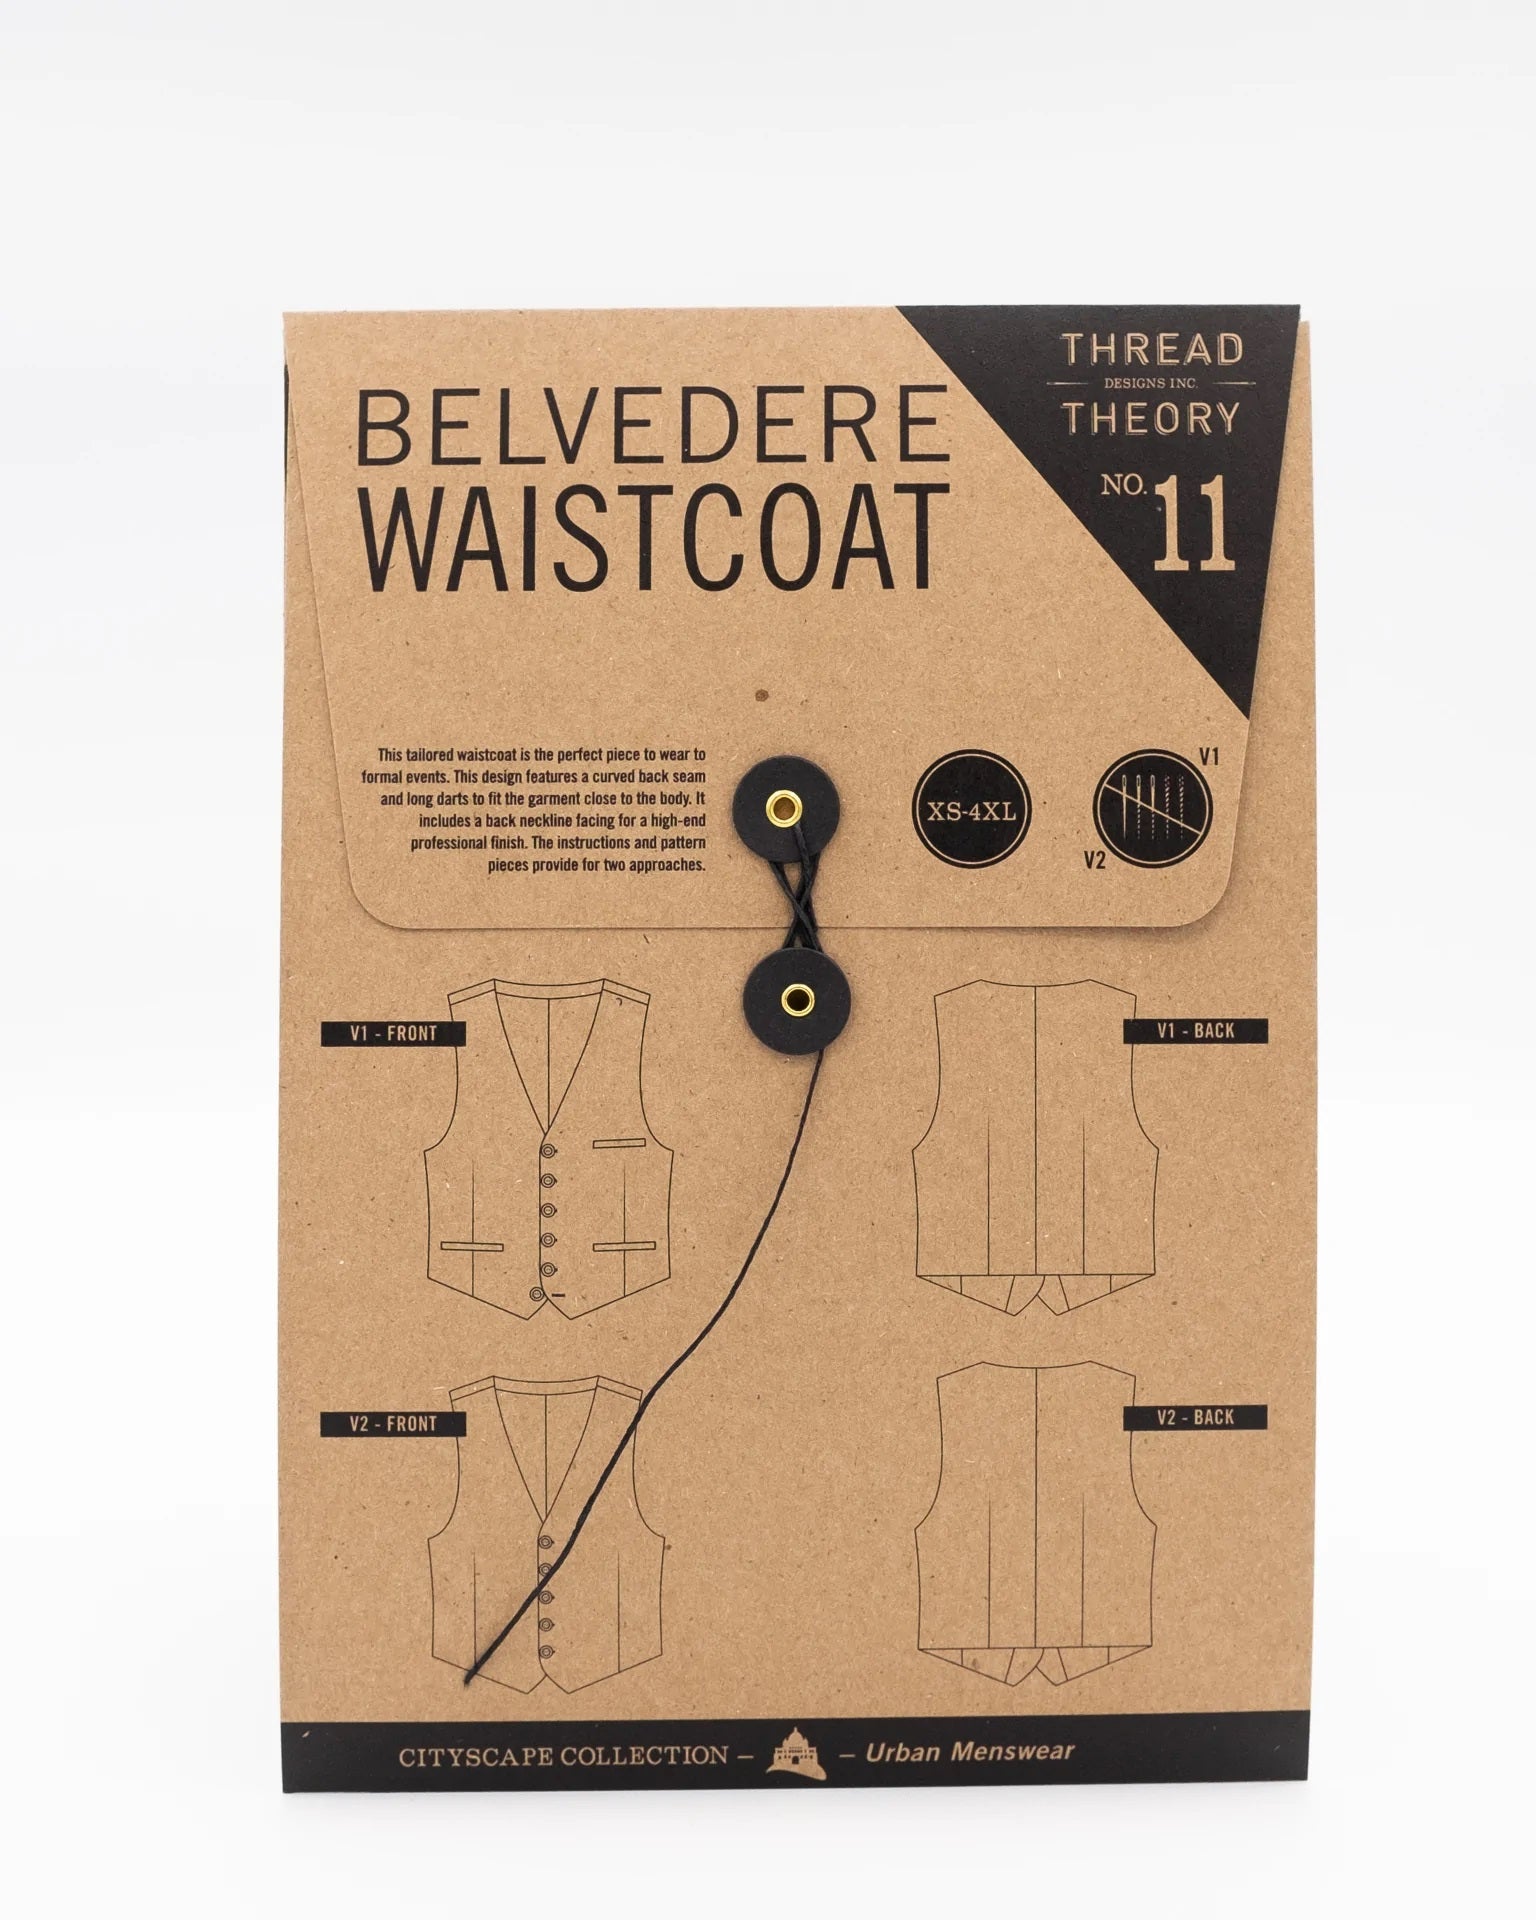 Belvedere Waistcoat Pattern by Thread Theory